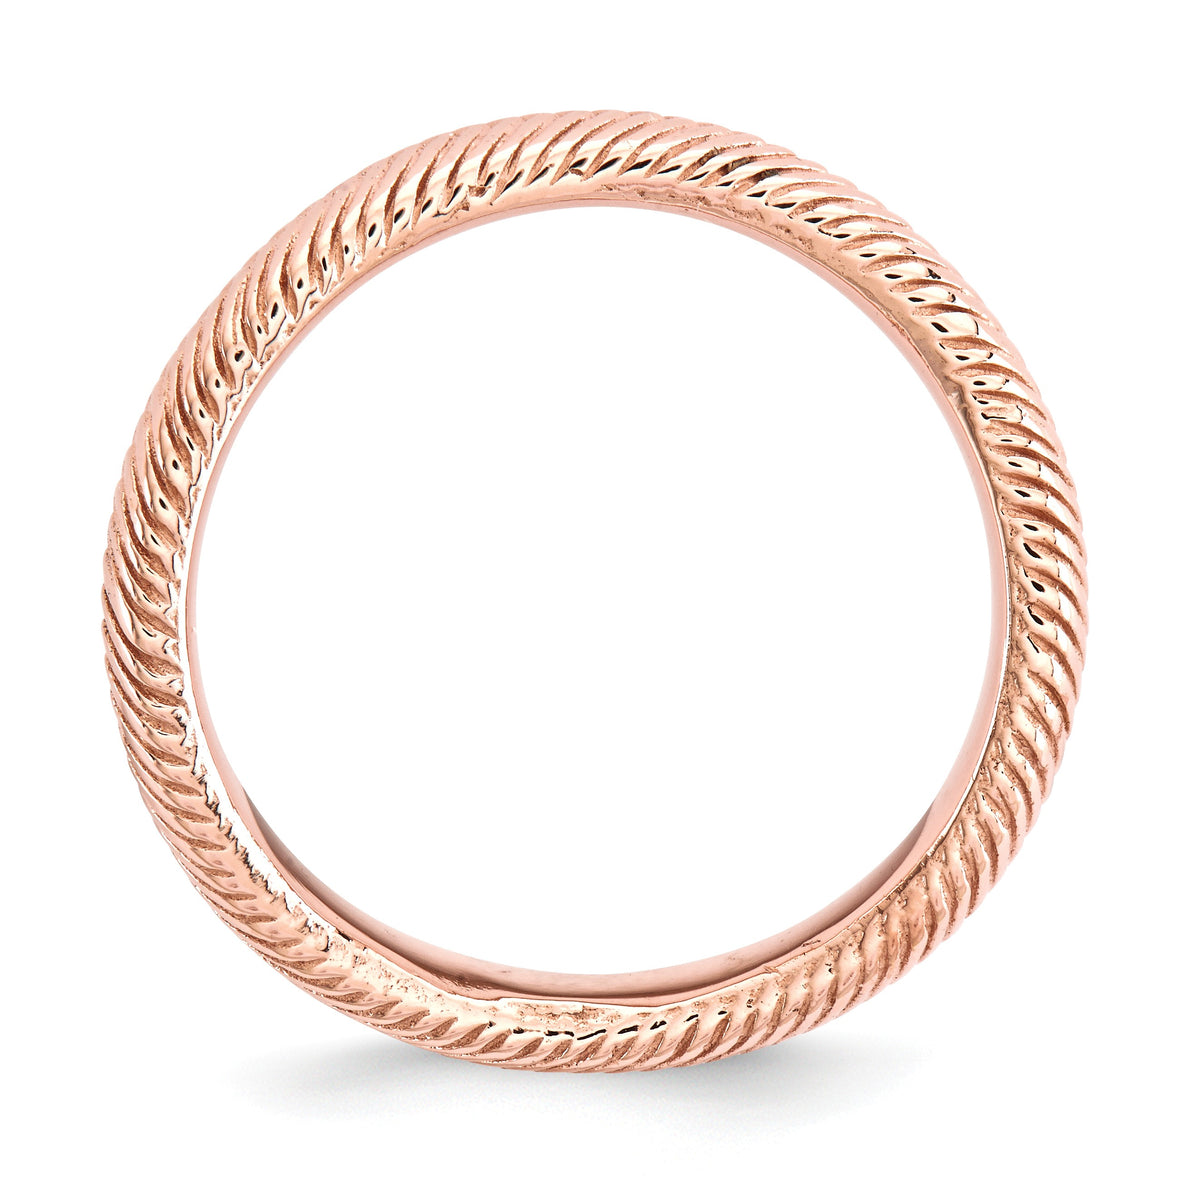 Alternate view of the 3.25mm Stackable 14K Rose Gold Plated Silver Curved Herringbone Band by The Black Bow Jewelry Co.